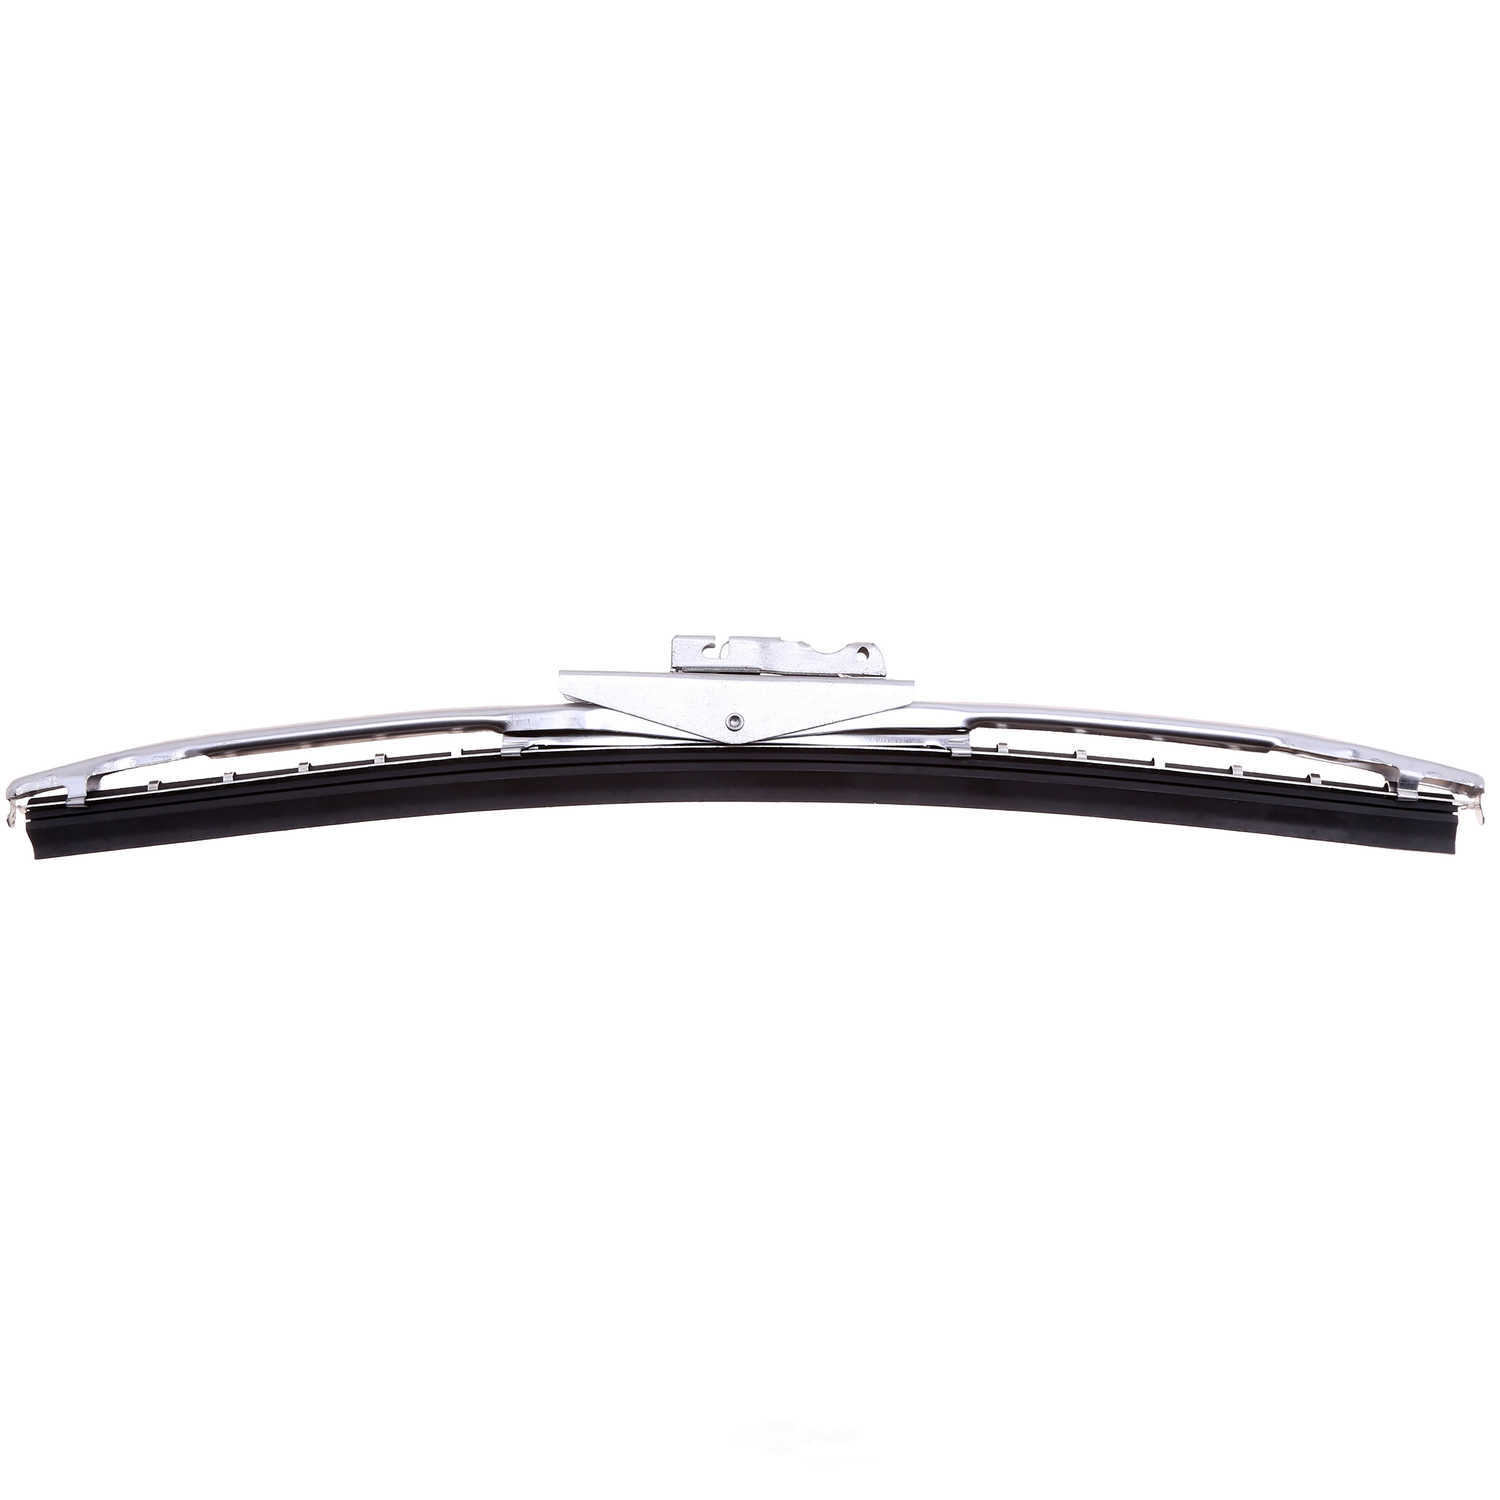 TRICO - TRICO Exact Fit Wiper Blade (Front Left) - TRI 11-6